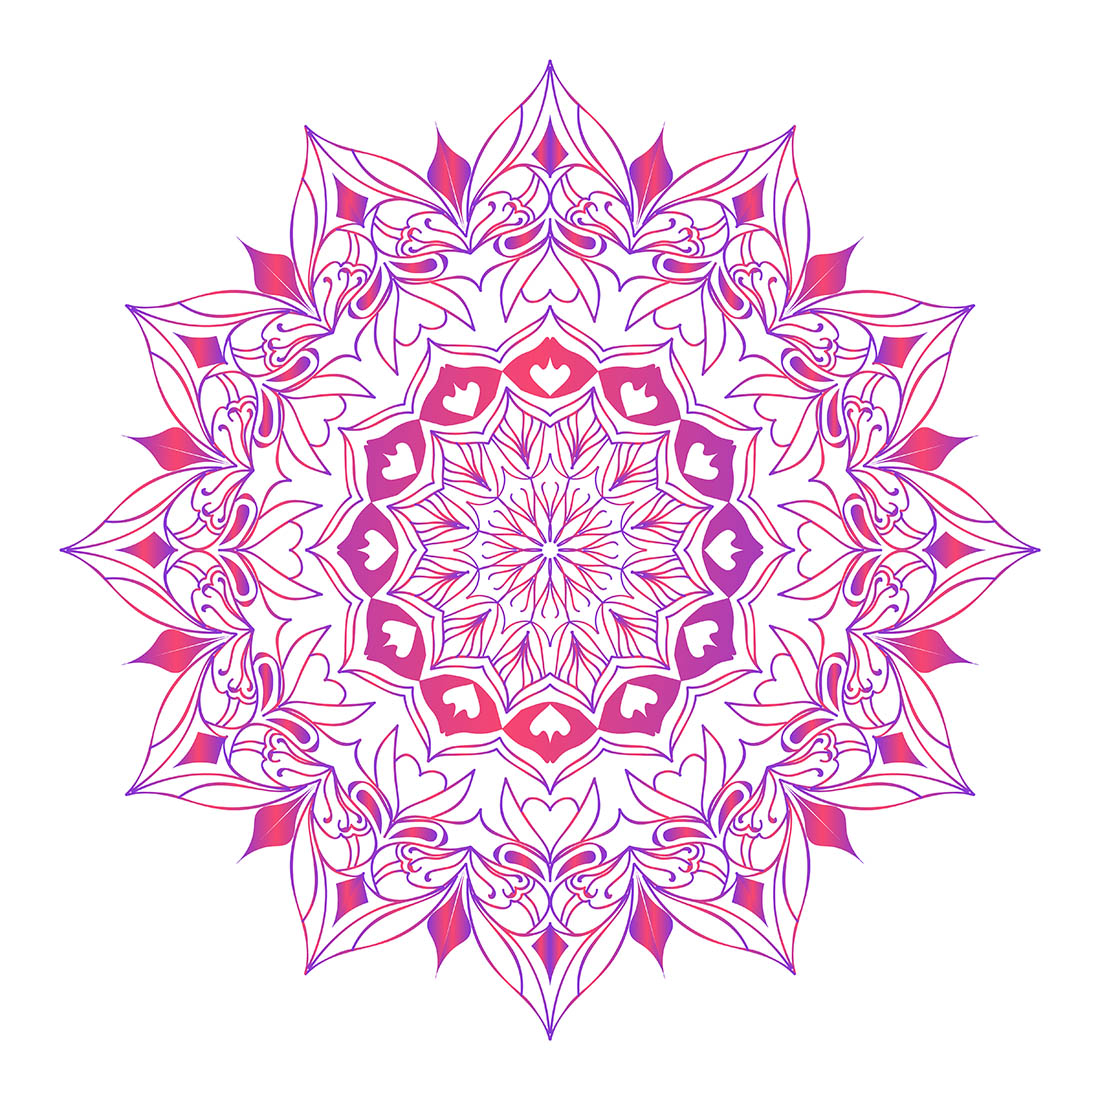 Luxury mandala of beautiful flowers abstract Islamic decorative mosque tile design pink color background pattern preview image.